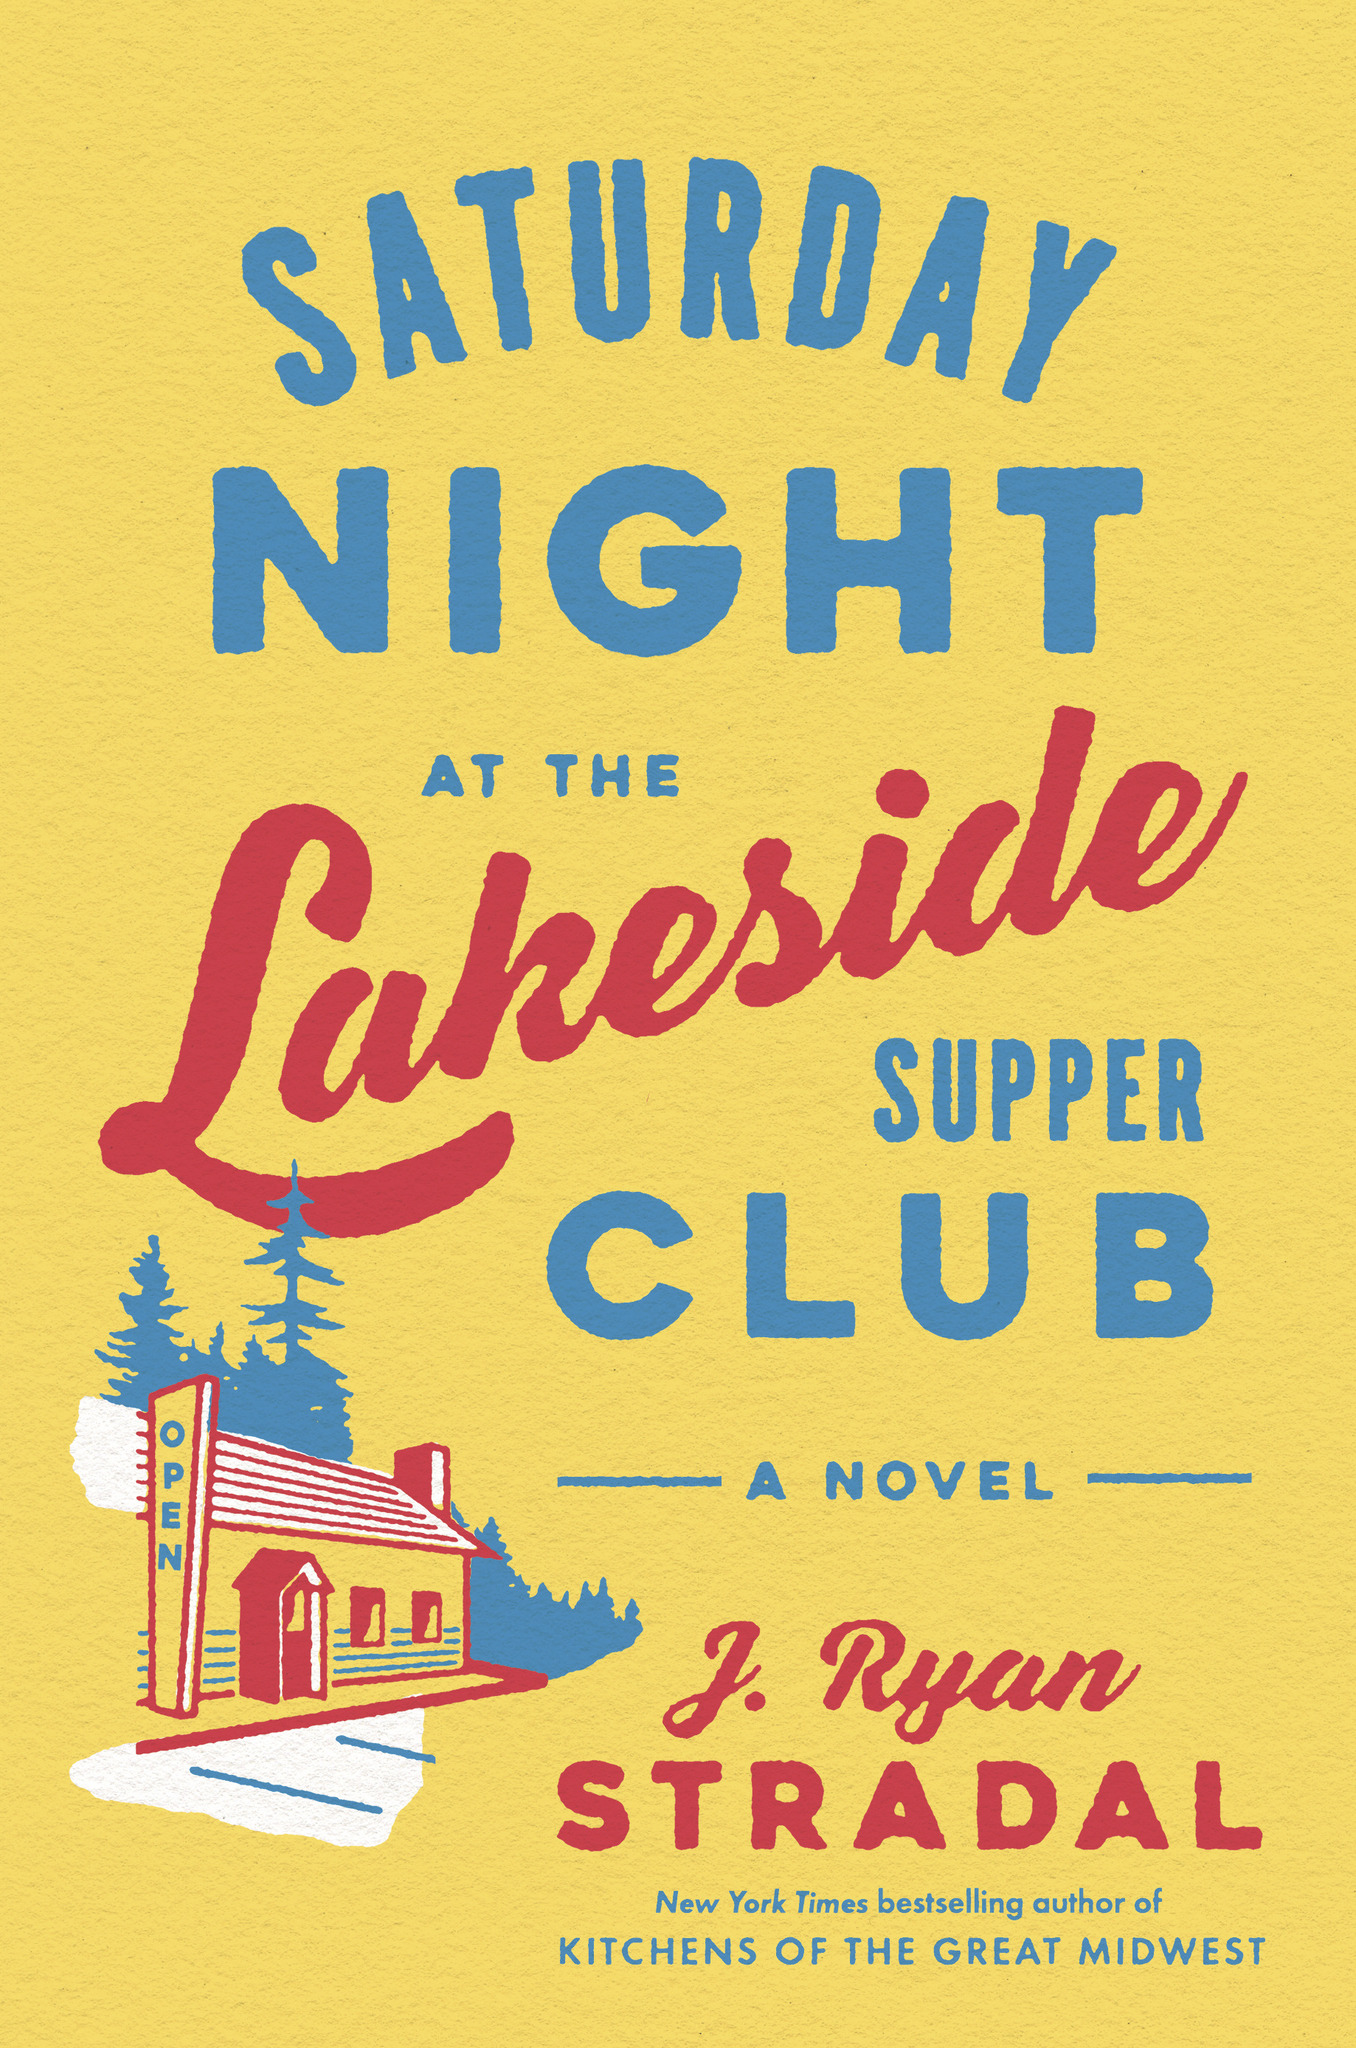 Author Event with J. Ryan Stradal/Saturday Night at the Lakeside Supper Club in conversation with Carson Vaughan